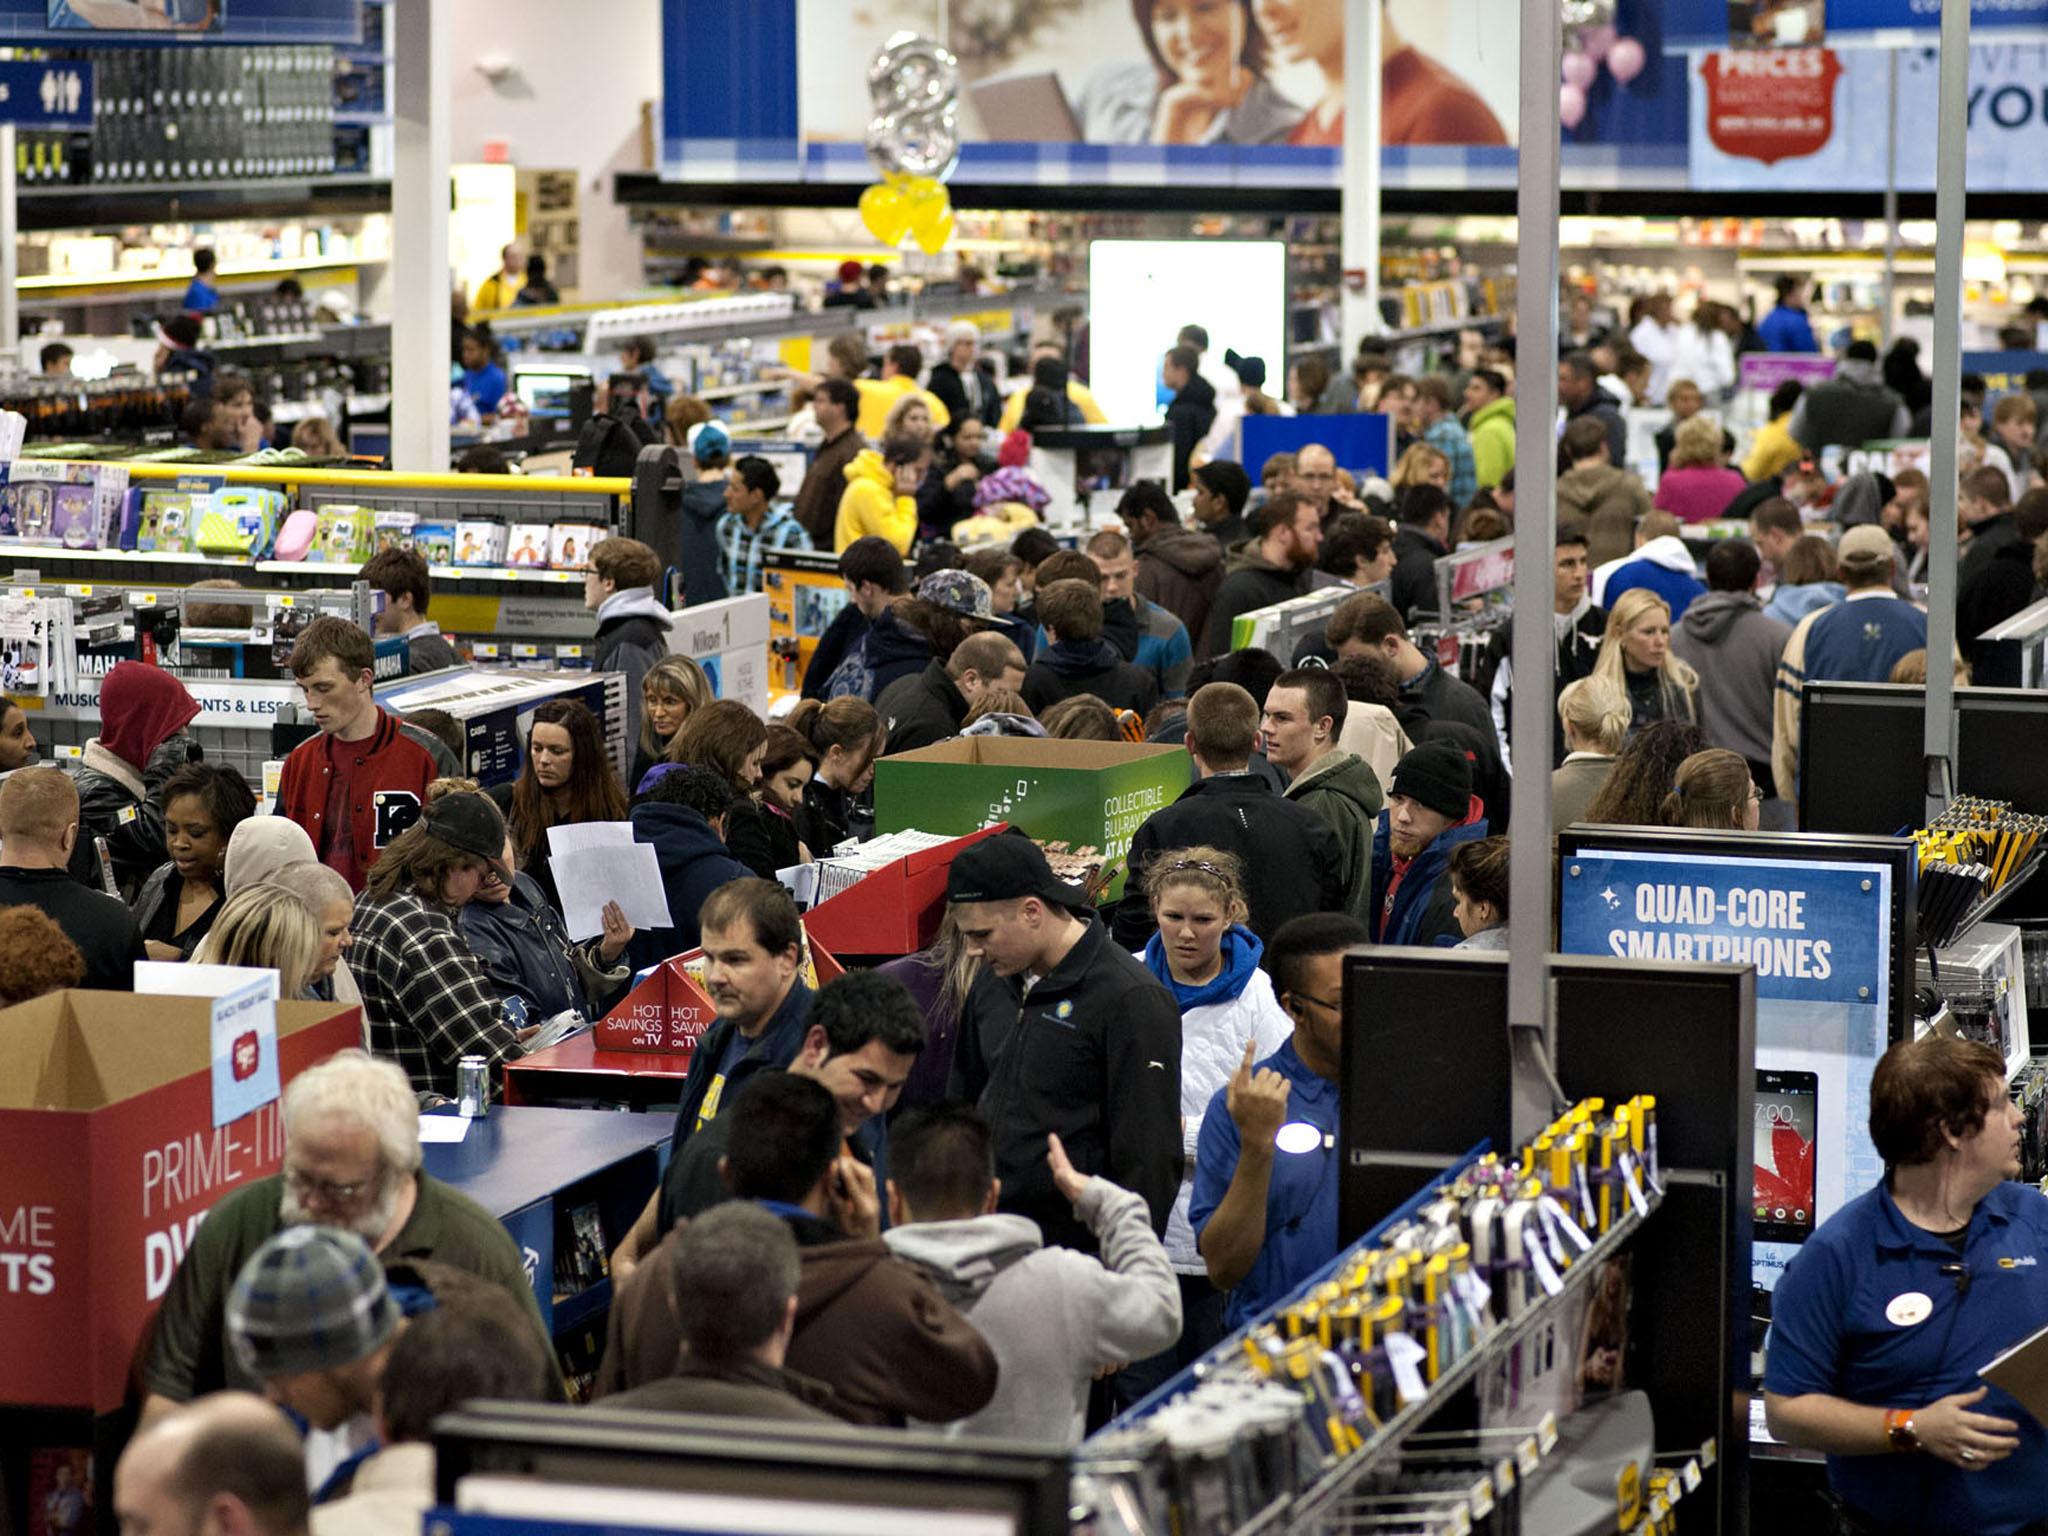 Black Friday draws millions of Americans to stores in holiday season